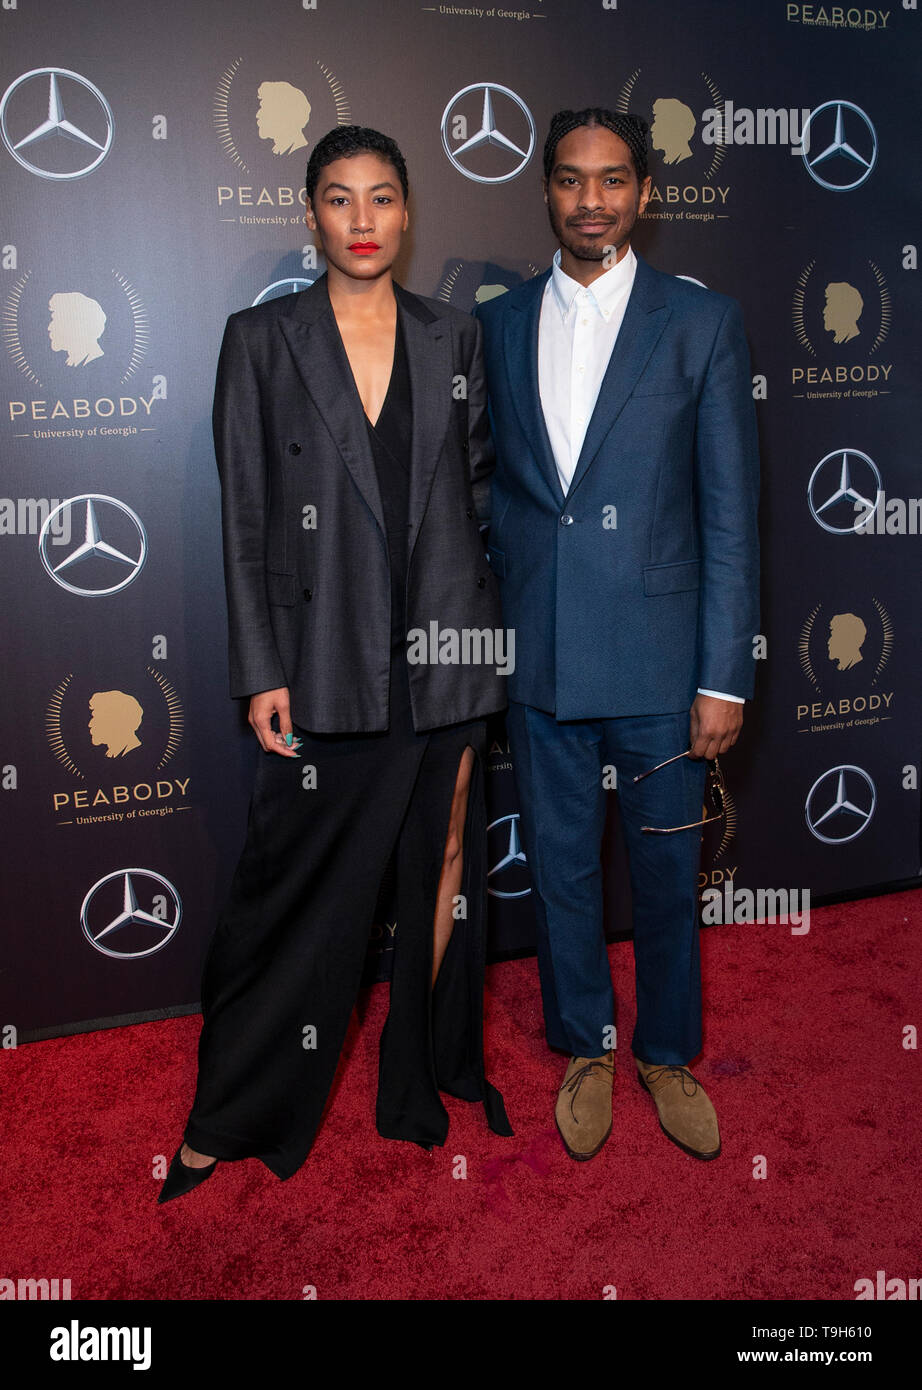 New York, NY - 18 mai 2019 : Naima Ramos Chapman et Terence Nance assister à Peabody Awards 78e assemblée annuelle au Cipriani Wall Street Banque D'Images